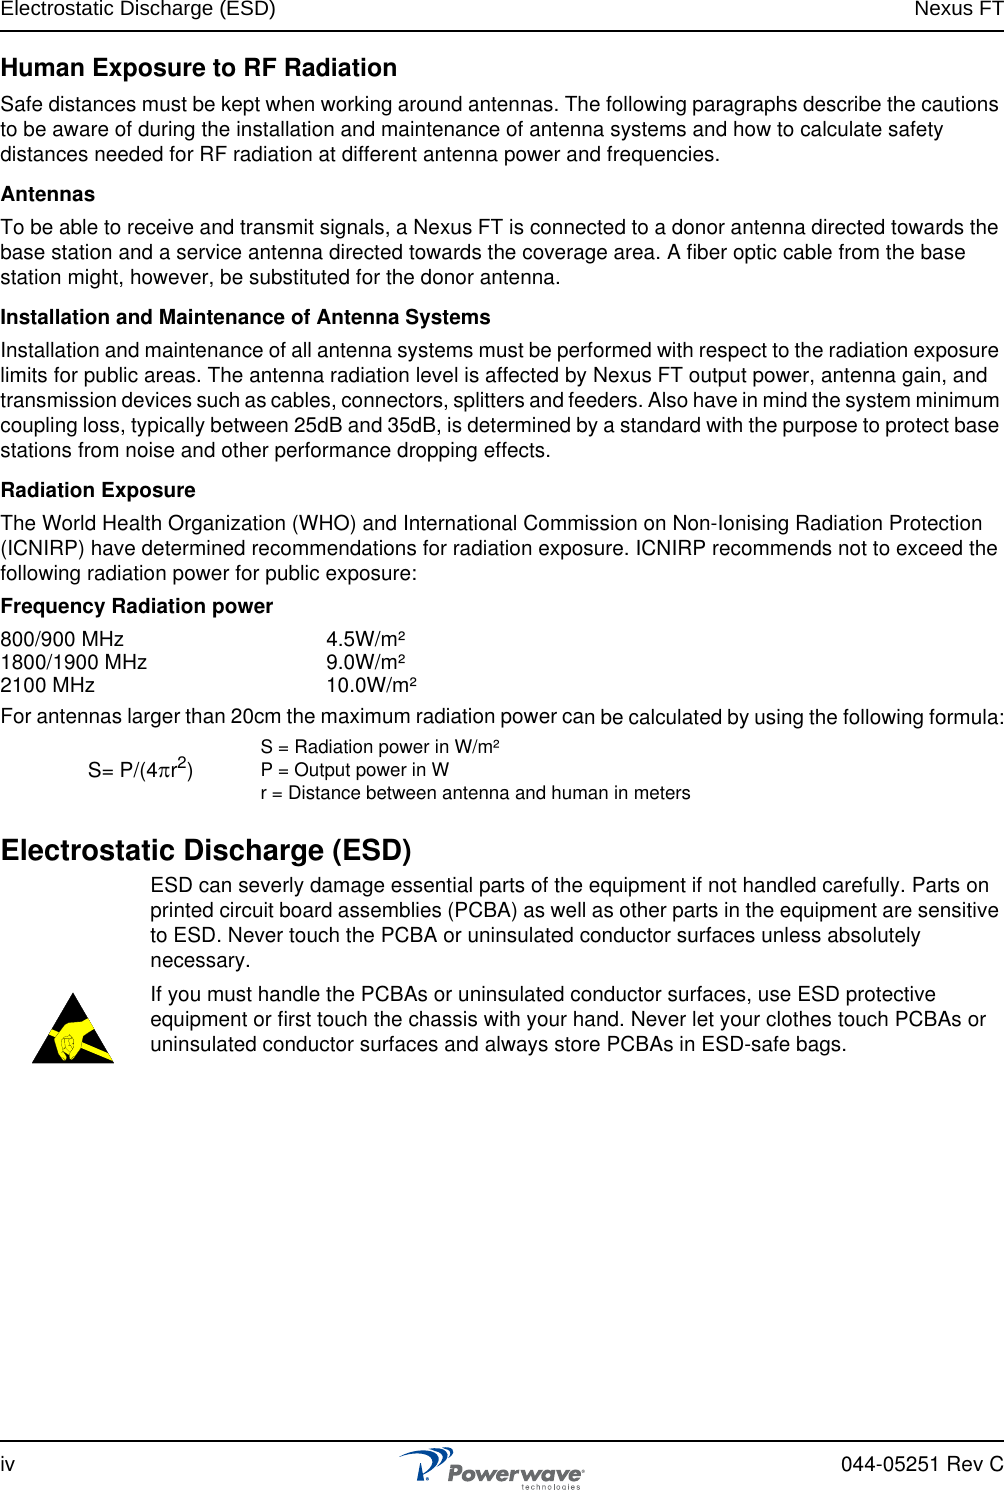 Electrostatic Discharge (ESD) Nexus FTiv 044-05251 Rev CHuman Exposure to RF RadiationSafe distances must be kept when working around antennas. The following paragraphs describe the cautions to be aware of during the installation and maintenance of antenna systems and how to calculate safety distances needed for RF radiation at different antenna power and frequencies.AntennasTo be able to receive and transmit signals, a Nexus FT is connected to a donor antenna directed towards the base station and a service antenna directed towards the coverage area. A fiber optic cable from the base station might, however, be substituted for the donor antenna.Installation and Maintenance of Antenna SystemsInstallation and maintenance of all antenna systems must be performed with respect to the radiation exposure limits for public areas. The antenna radiation level is affected by Nexus FT output power, antenna gain, and transmission devices such as cables, connectors, splitters and feeders. Also have in mind the system minimum coupling loss, typically between 25dB and 35dB, is determined by a standard with the purpose to protect base stations from noise and other performance dropping effects.Radiation ExposureThe World Health Organization (WHO) and International Commission on Non-Ionising Radiation Protection (ICNIRP) have determined recommendations for radiation exposure. ICNIRP recommends not to exceed the following radiation power for public exposure:Frequency Radiation power800/900 MHz 4.5W/m²1800/1900 MHz 9.0W/m²2100 MHz 10.0W/m²For antennas larger than 20cm the maximum radiation power can be calculated by using the following formula:Electrostatic Discharge (ESD) ESD can severly damage essential parts of the equipment if not handled carefully. Parts on printed circuit board assemblies (PCBA) as well as other parts in the equipment are sensitive to ESD. Never touch the PCBA or uninsulated conductor surfaces unless absolutely necessary.If you must handle the PCBAs or uninsulated conductor surfaces, use ESD protective equipment or first touch the chassis with your hand. Never let your clothes touch PCBAs or uninsulated conductor surfaces and always store PCBAs in ESD-safe bags.S= P/(4πr2)S = Radiation power in W/m²P = Output power in Wr = Distance between antenna and human in meters